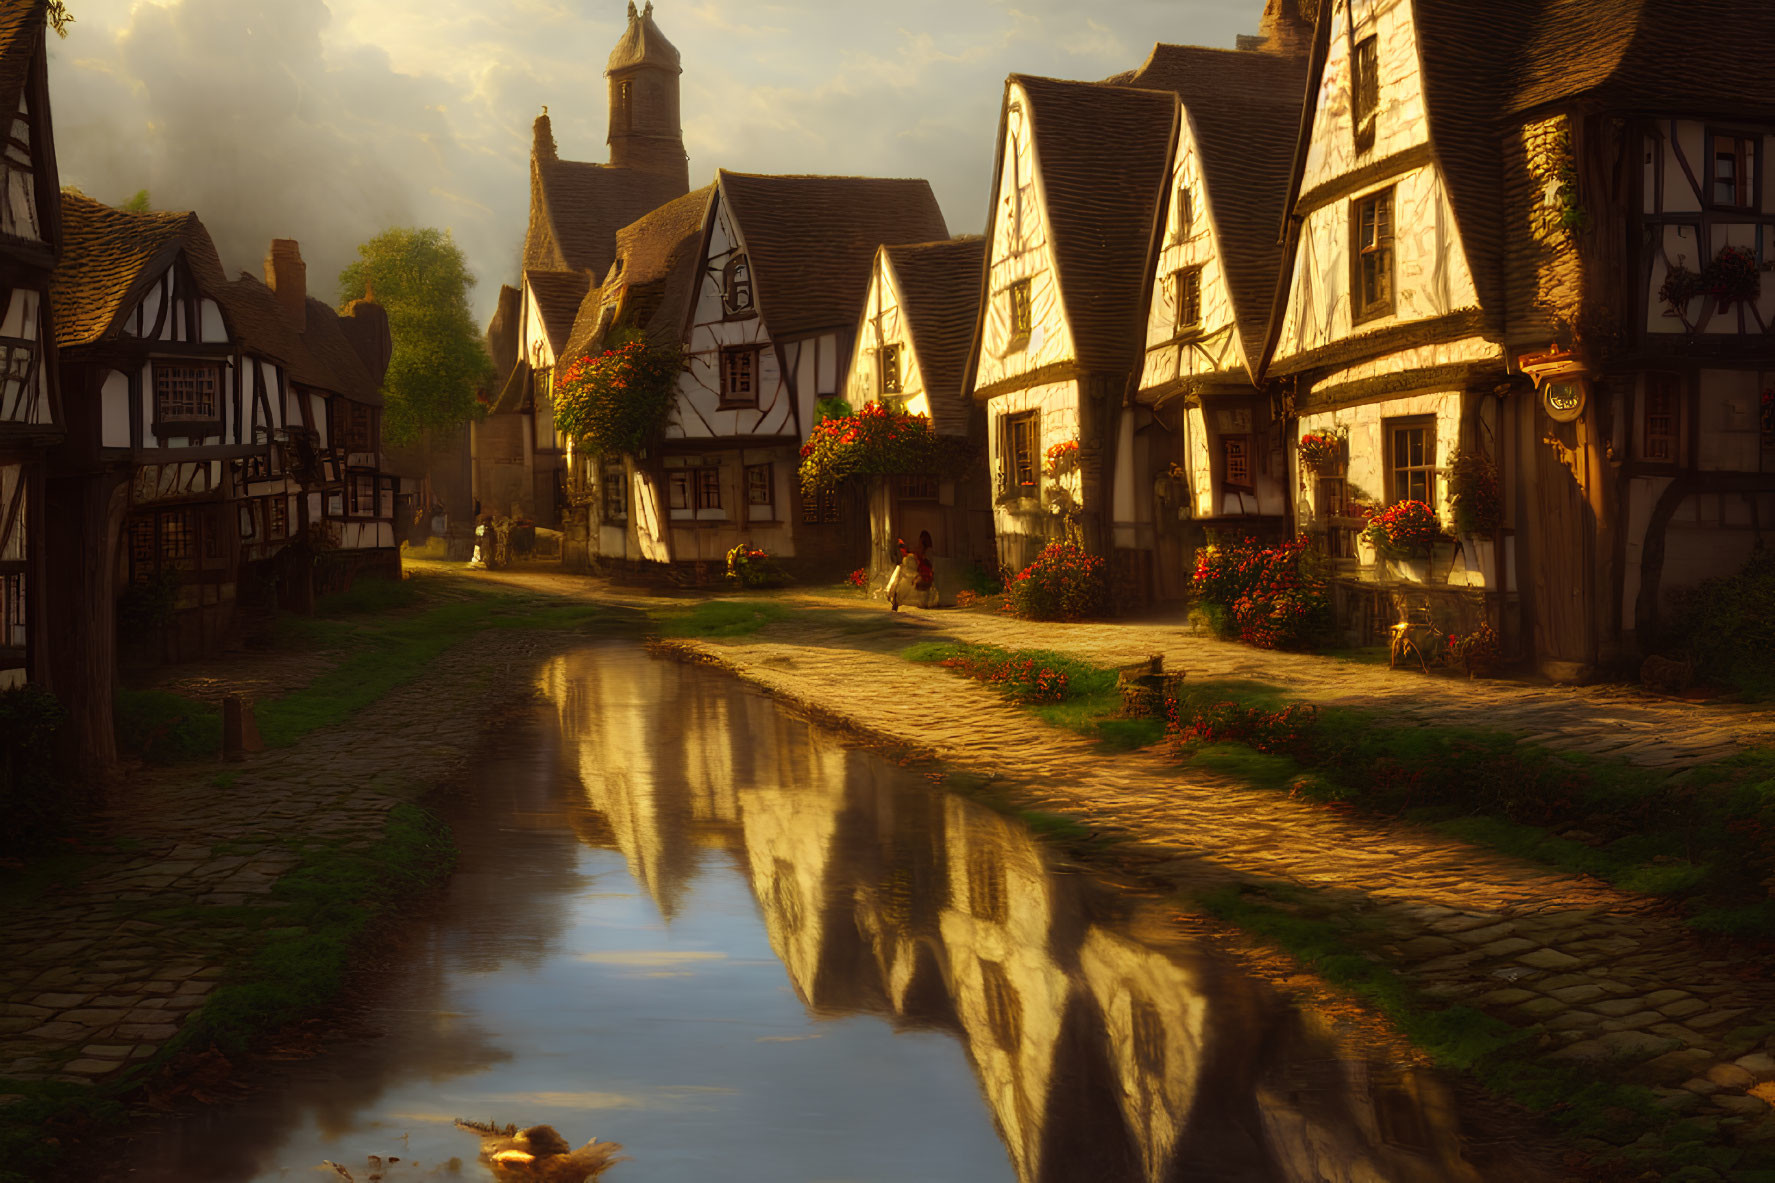 Charming village street at sunset with half-timbered houses and reflective stream